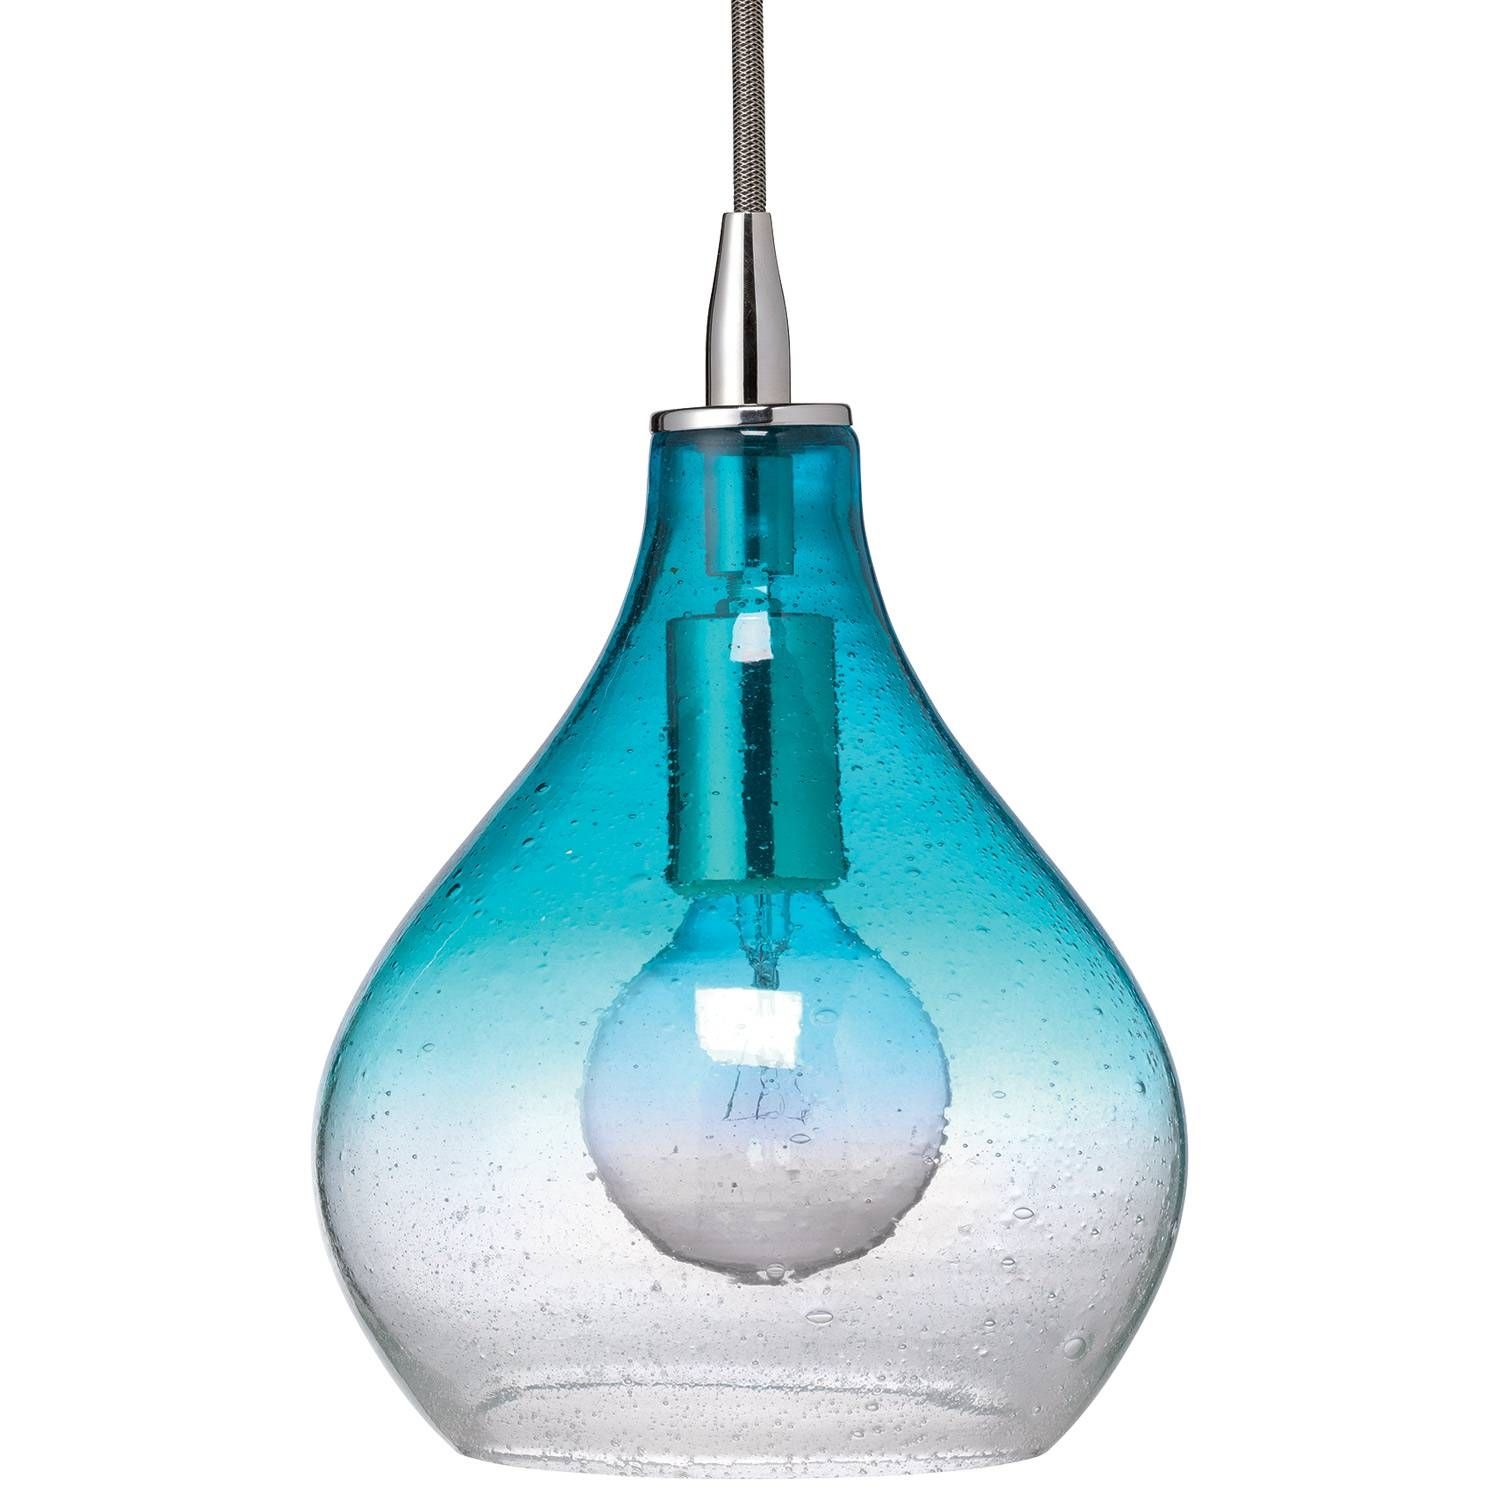 Lovely Aqua Pendant Lights 64 For Your Glass Ball Pendant Light Pertaining To Aqua Glass Pendant Lights (View 7 of 15)